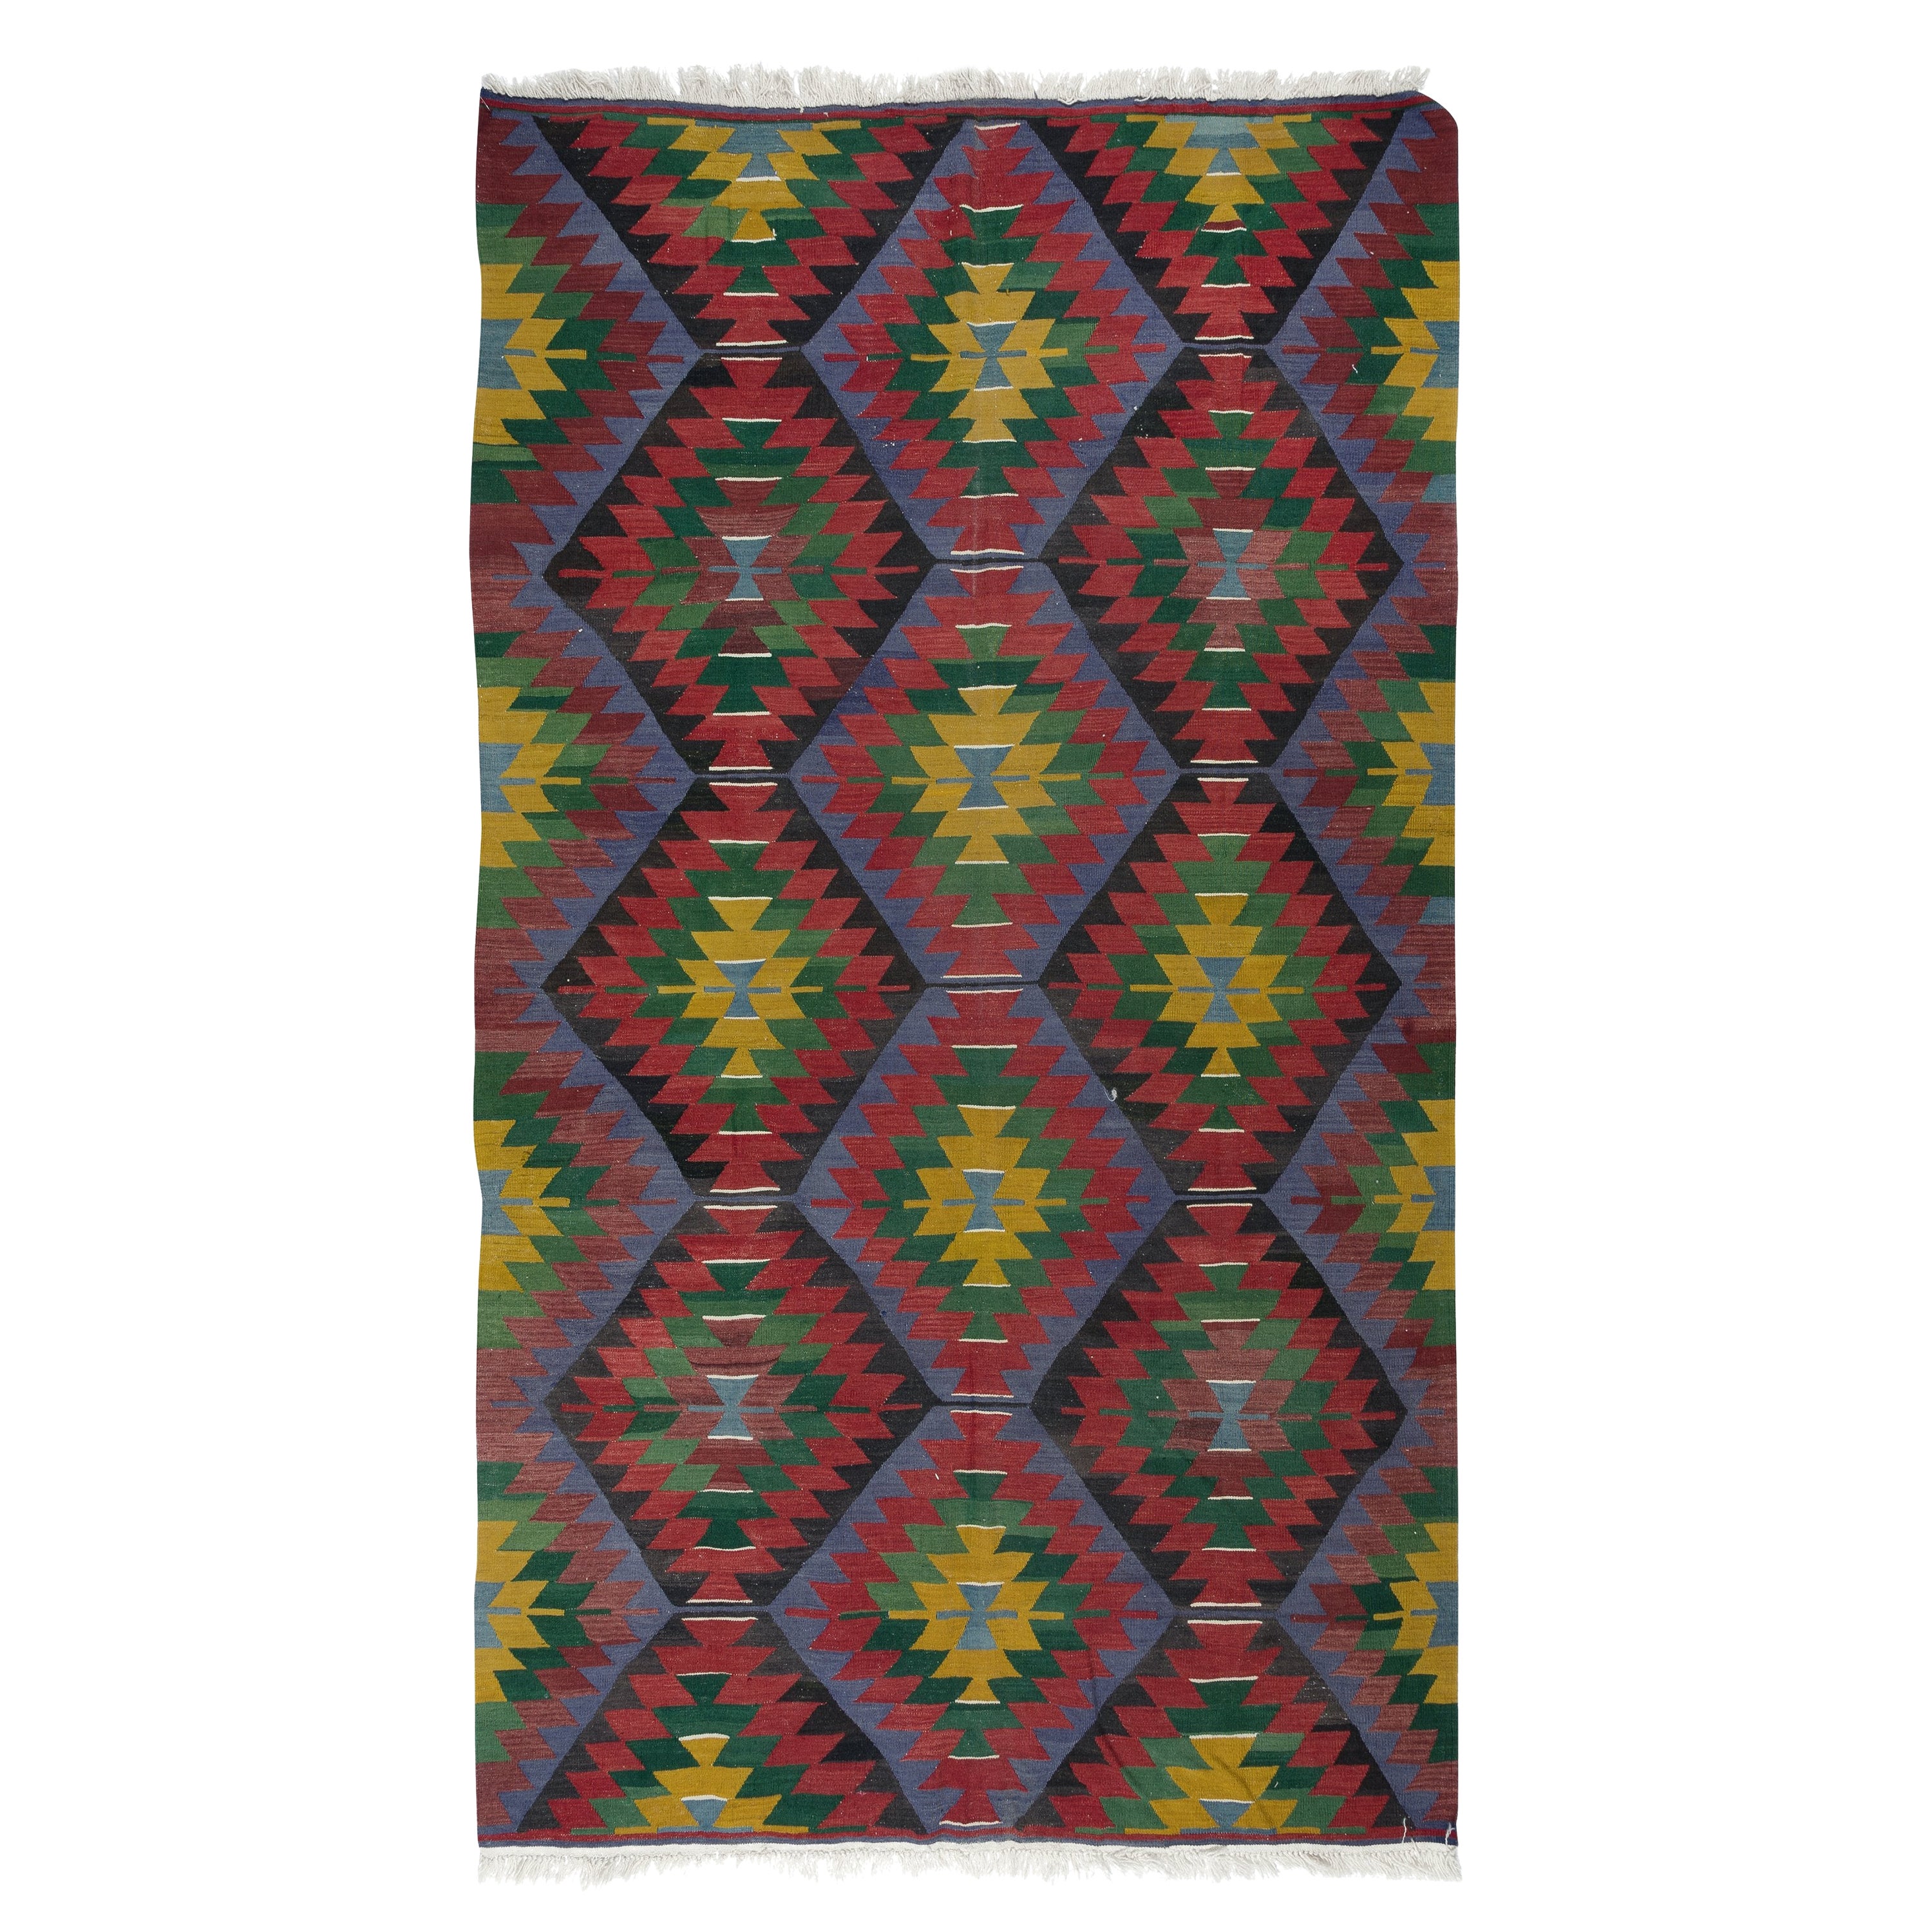 6x10.5 Ft Vintage Handwoven Turkish Kilim 'Flat Weave' with Geometric Patterns For Sale